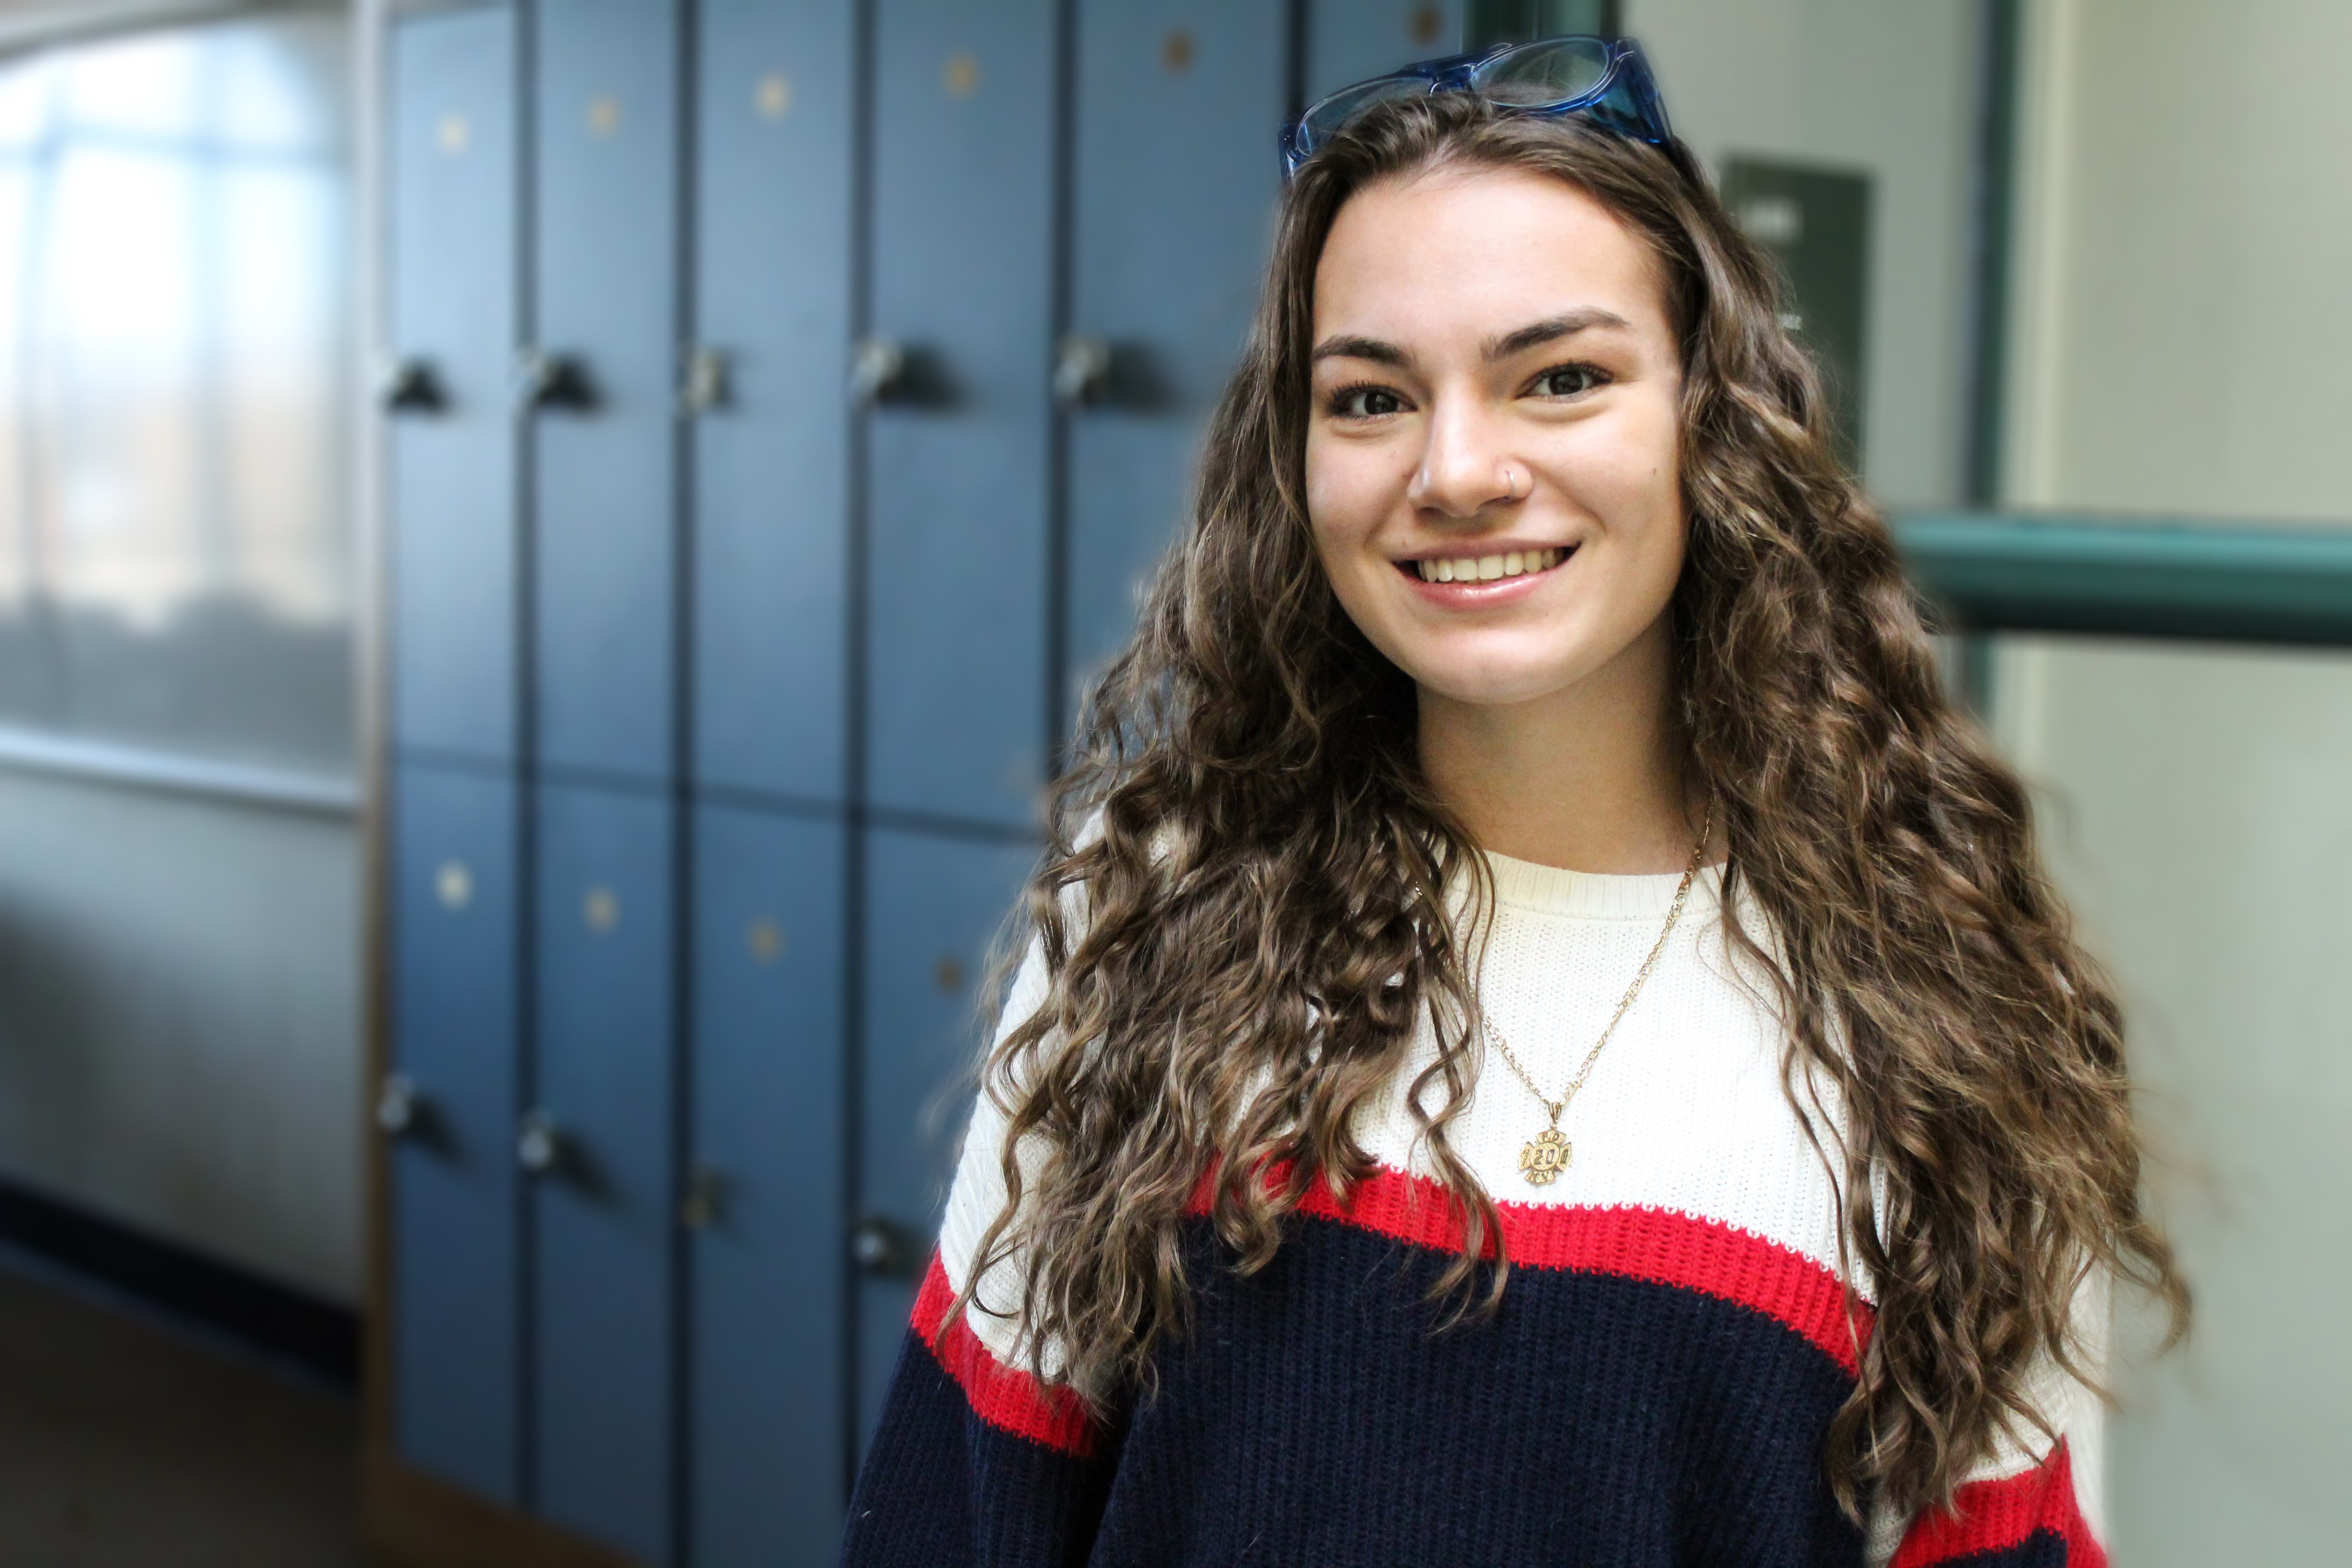 Analyse Giordano (CAHNR '20) has her eyes set on med school, but there’s a lot she wants to get done first, including potentially groundbreaking research.(Carson Stifel/UConn Photo)